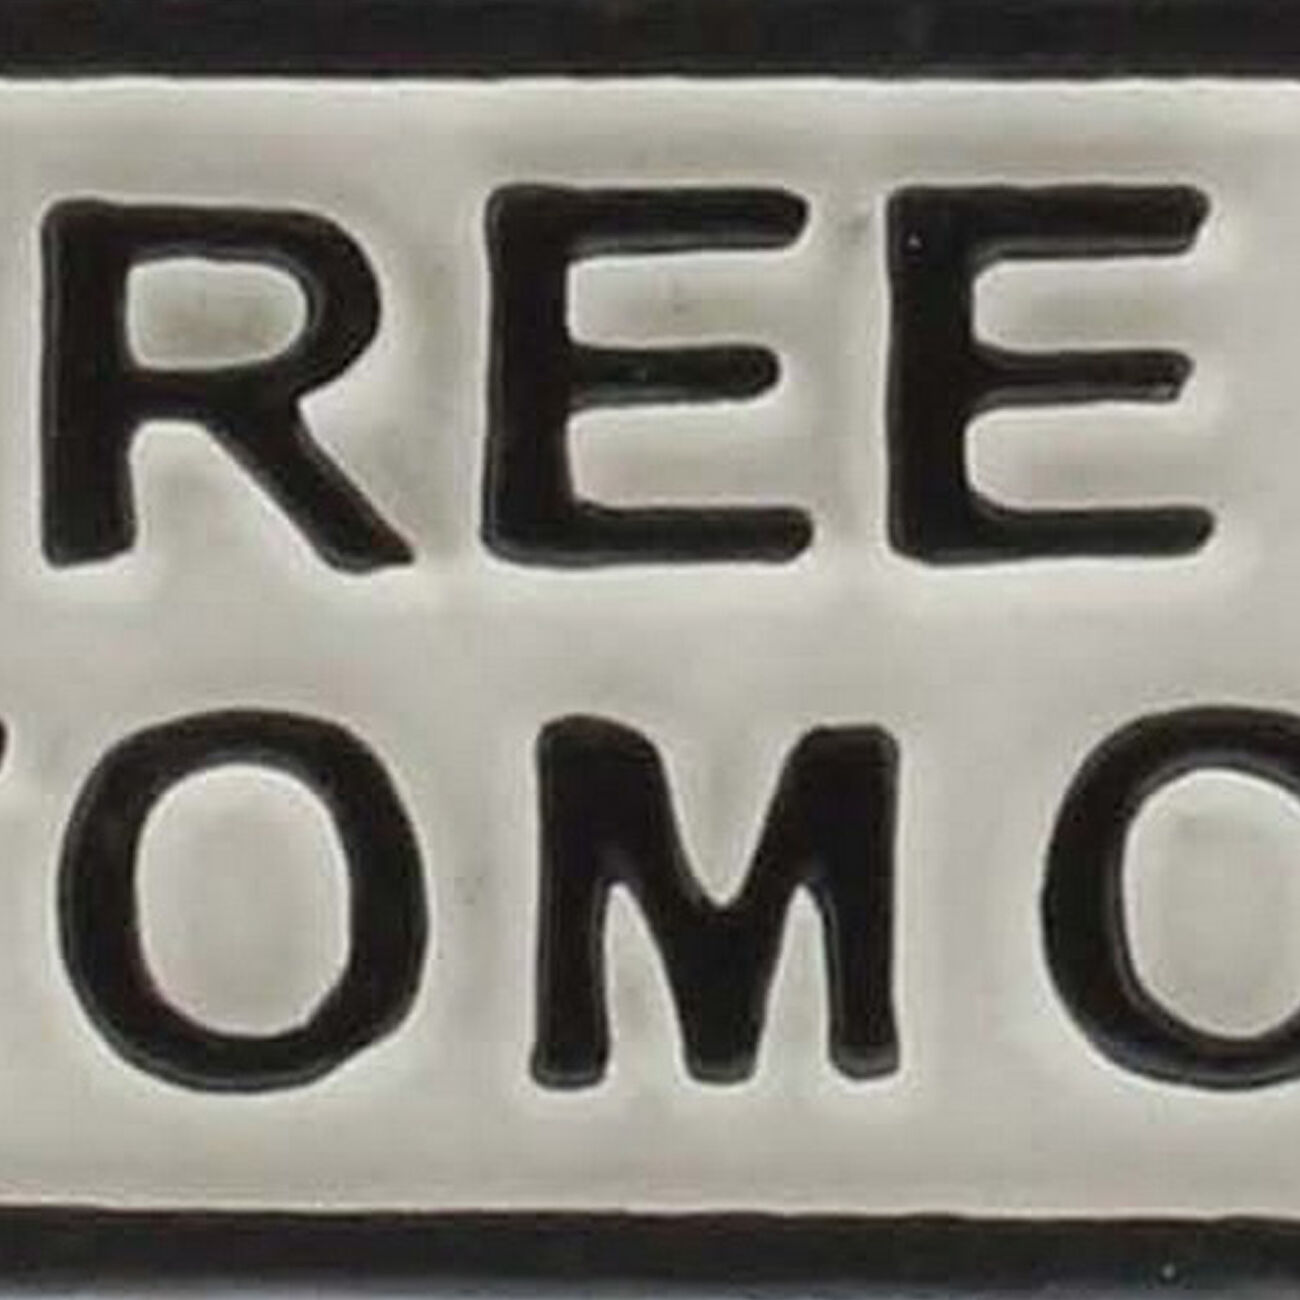 FREE BEER TOMORROW Metal Frame Wall Sign, White and Black